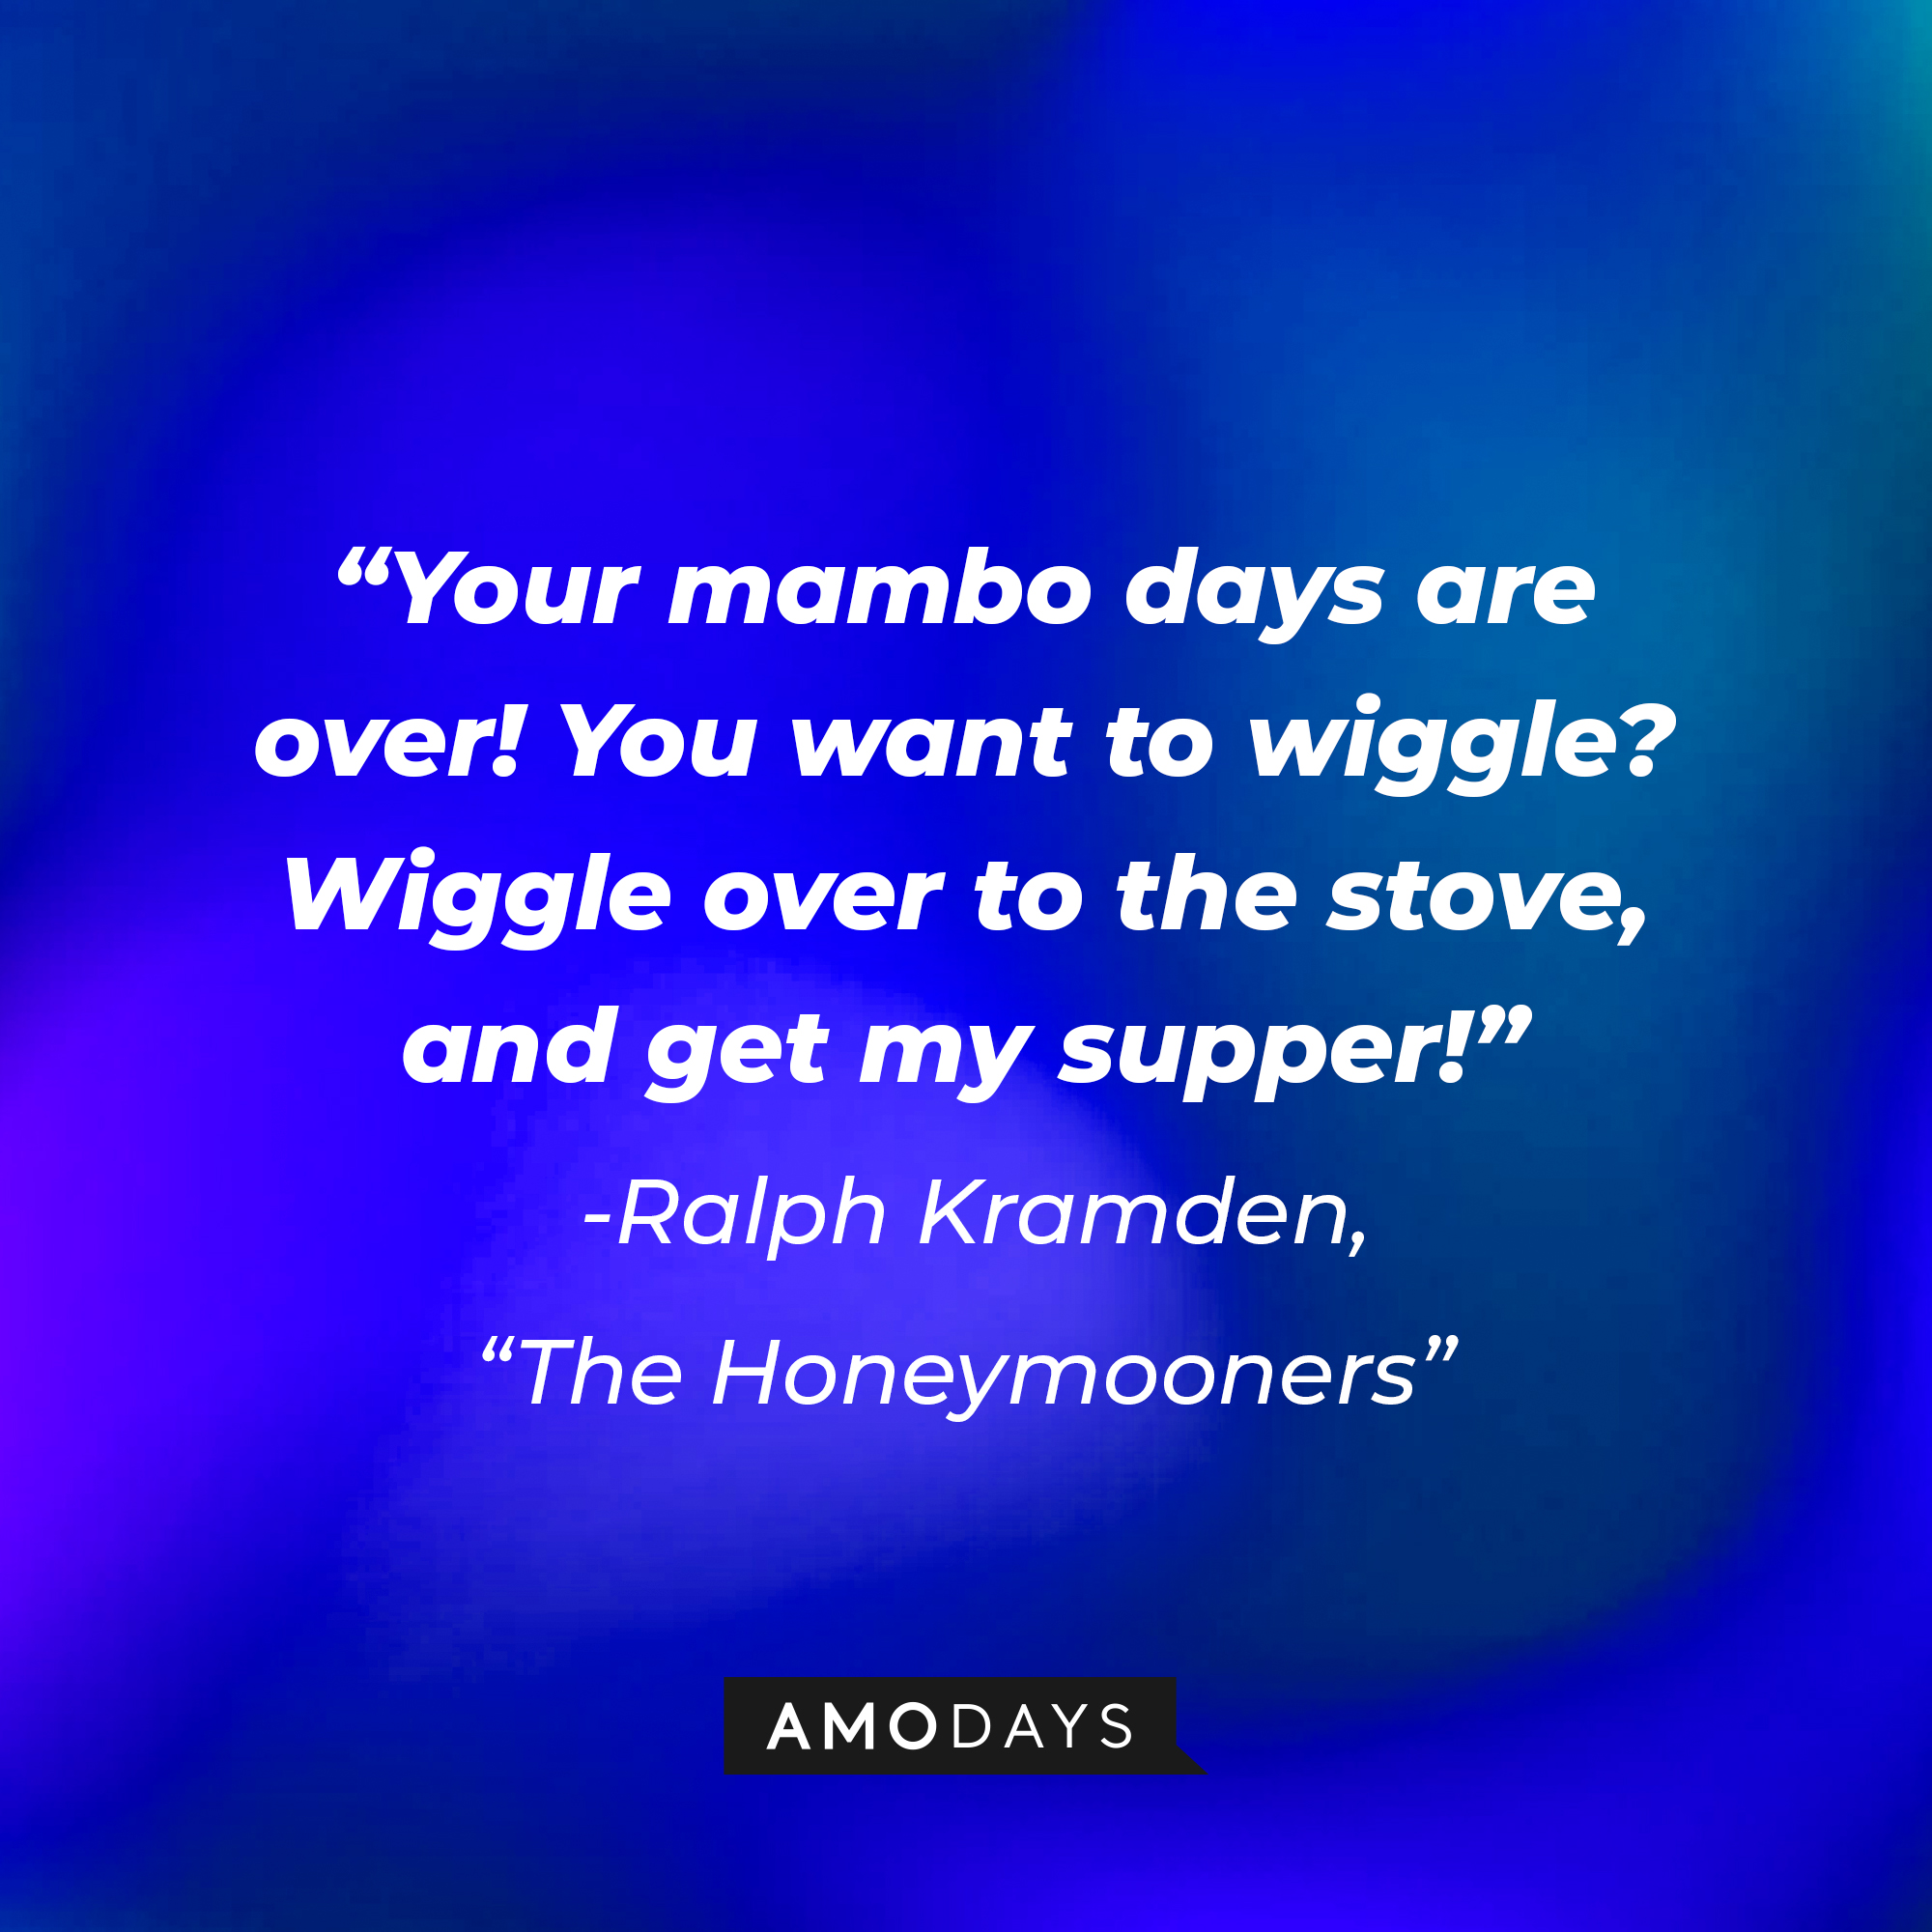 A quote from "The Honeymooners" Ralph Kramden: "Your mambo days are over! You want to wiggle? Wiggle over to the stove, and get my supper!" | Source: AmoDays